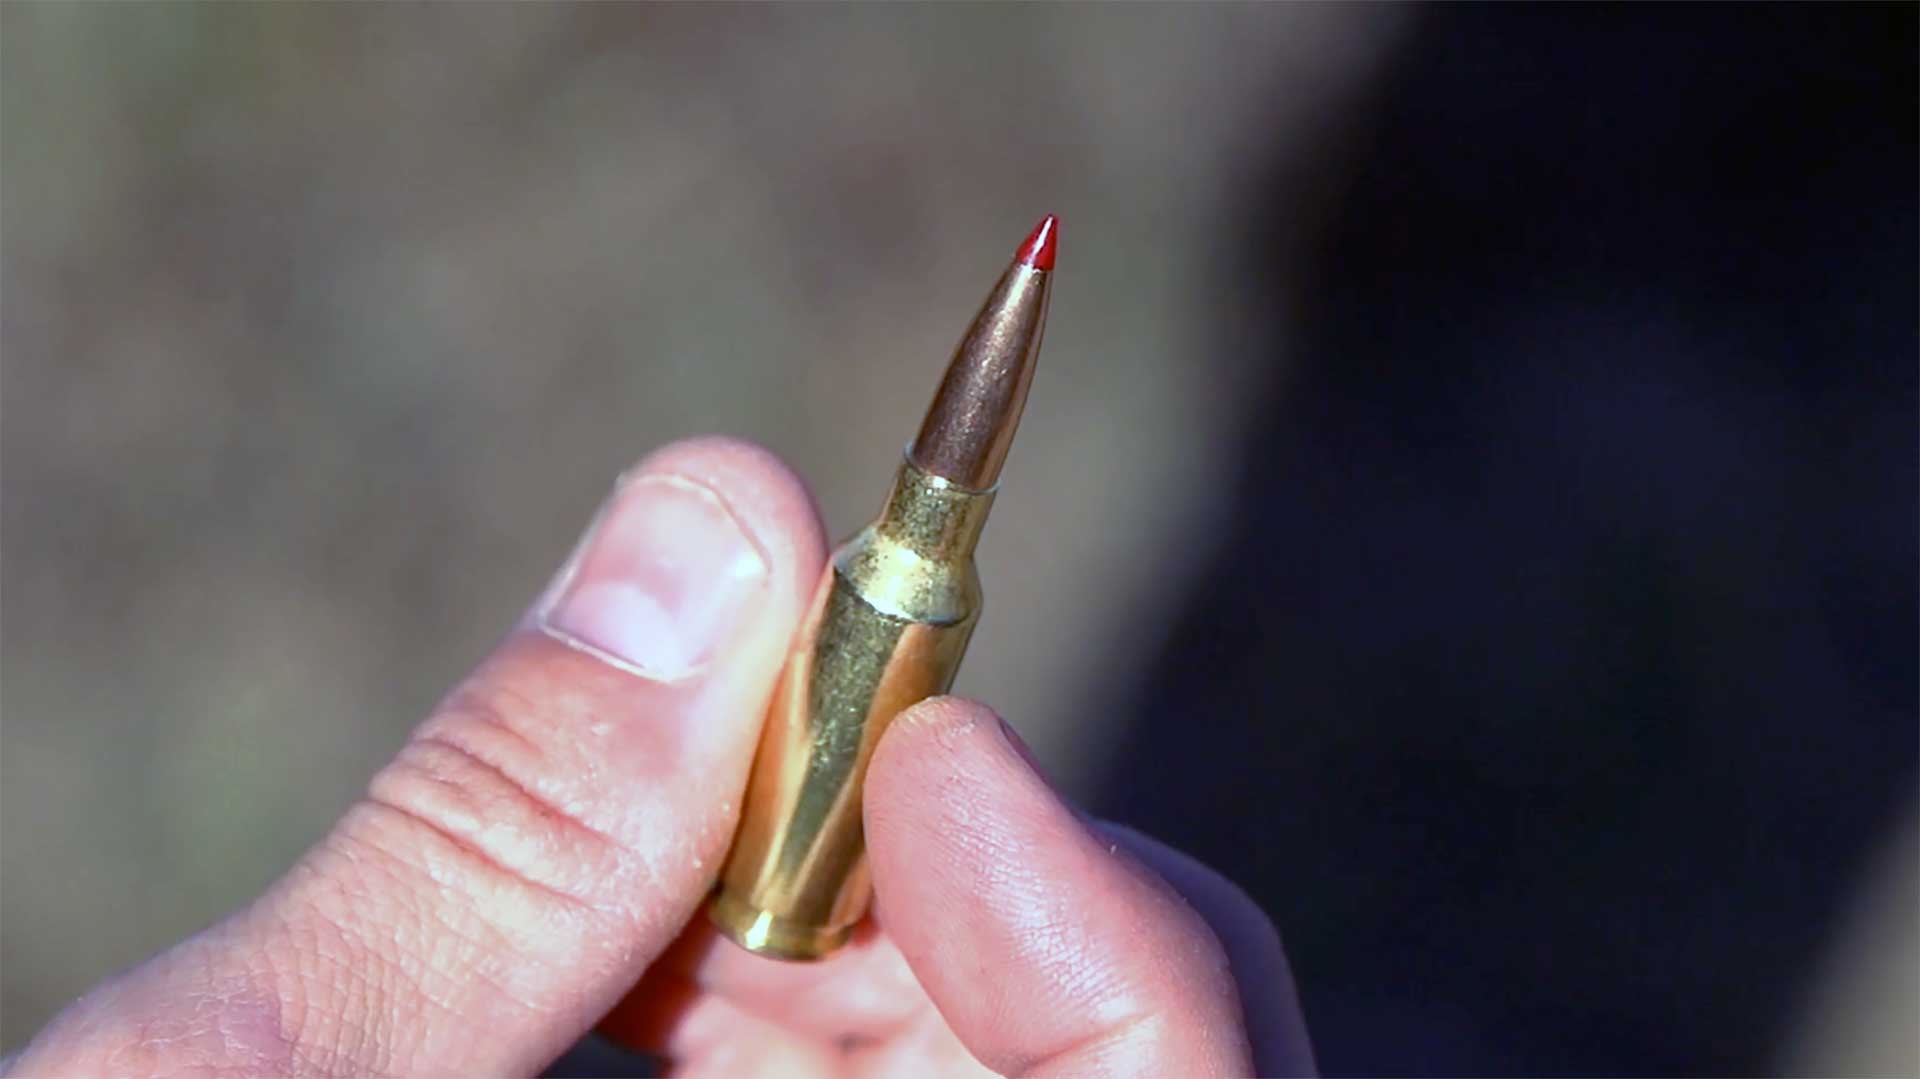 A man holding a Hornady 6mm ARC cartridge between his thumb and forefinger.